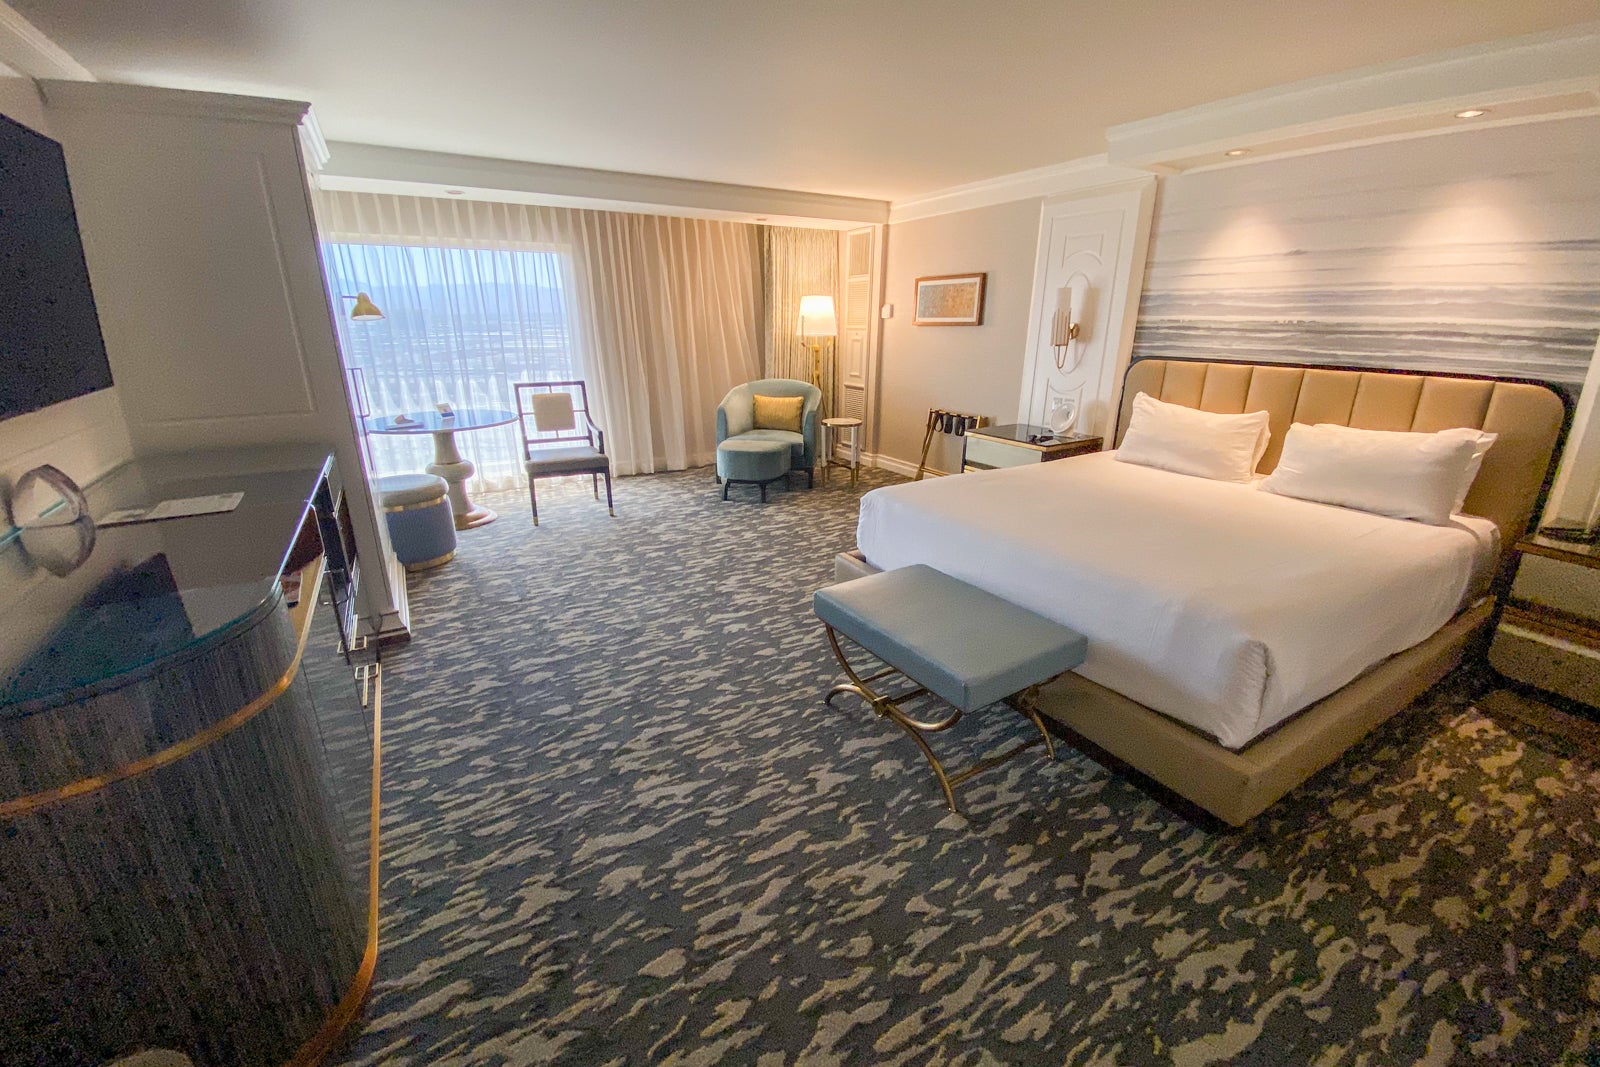 Old-school luxe or just old? A review of the Bellagio Las Vegas - The  Points Guy